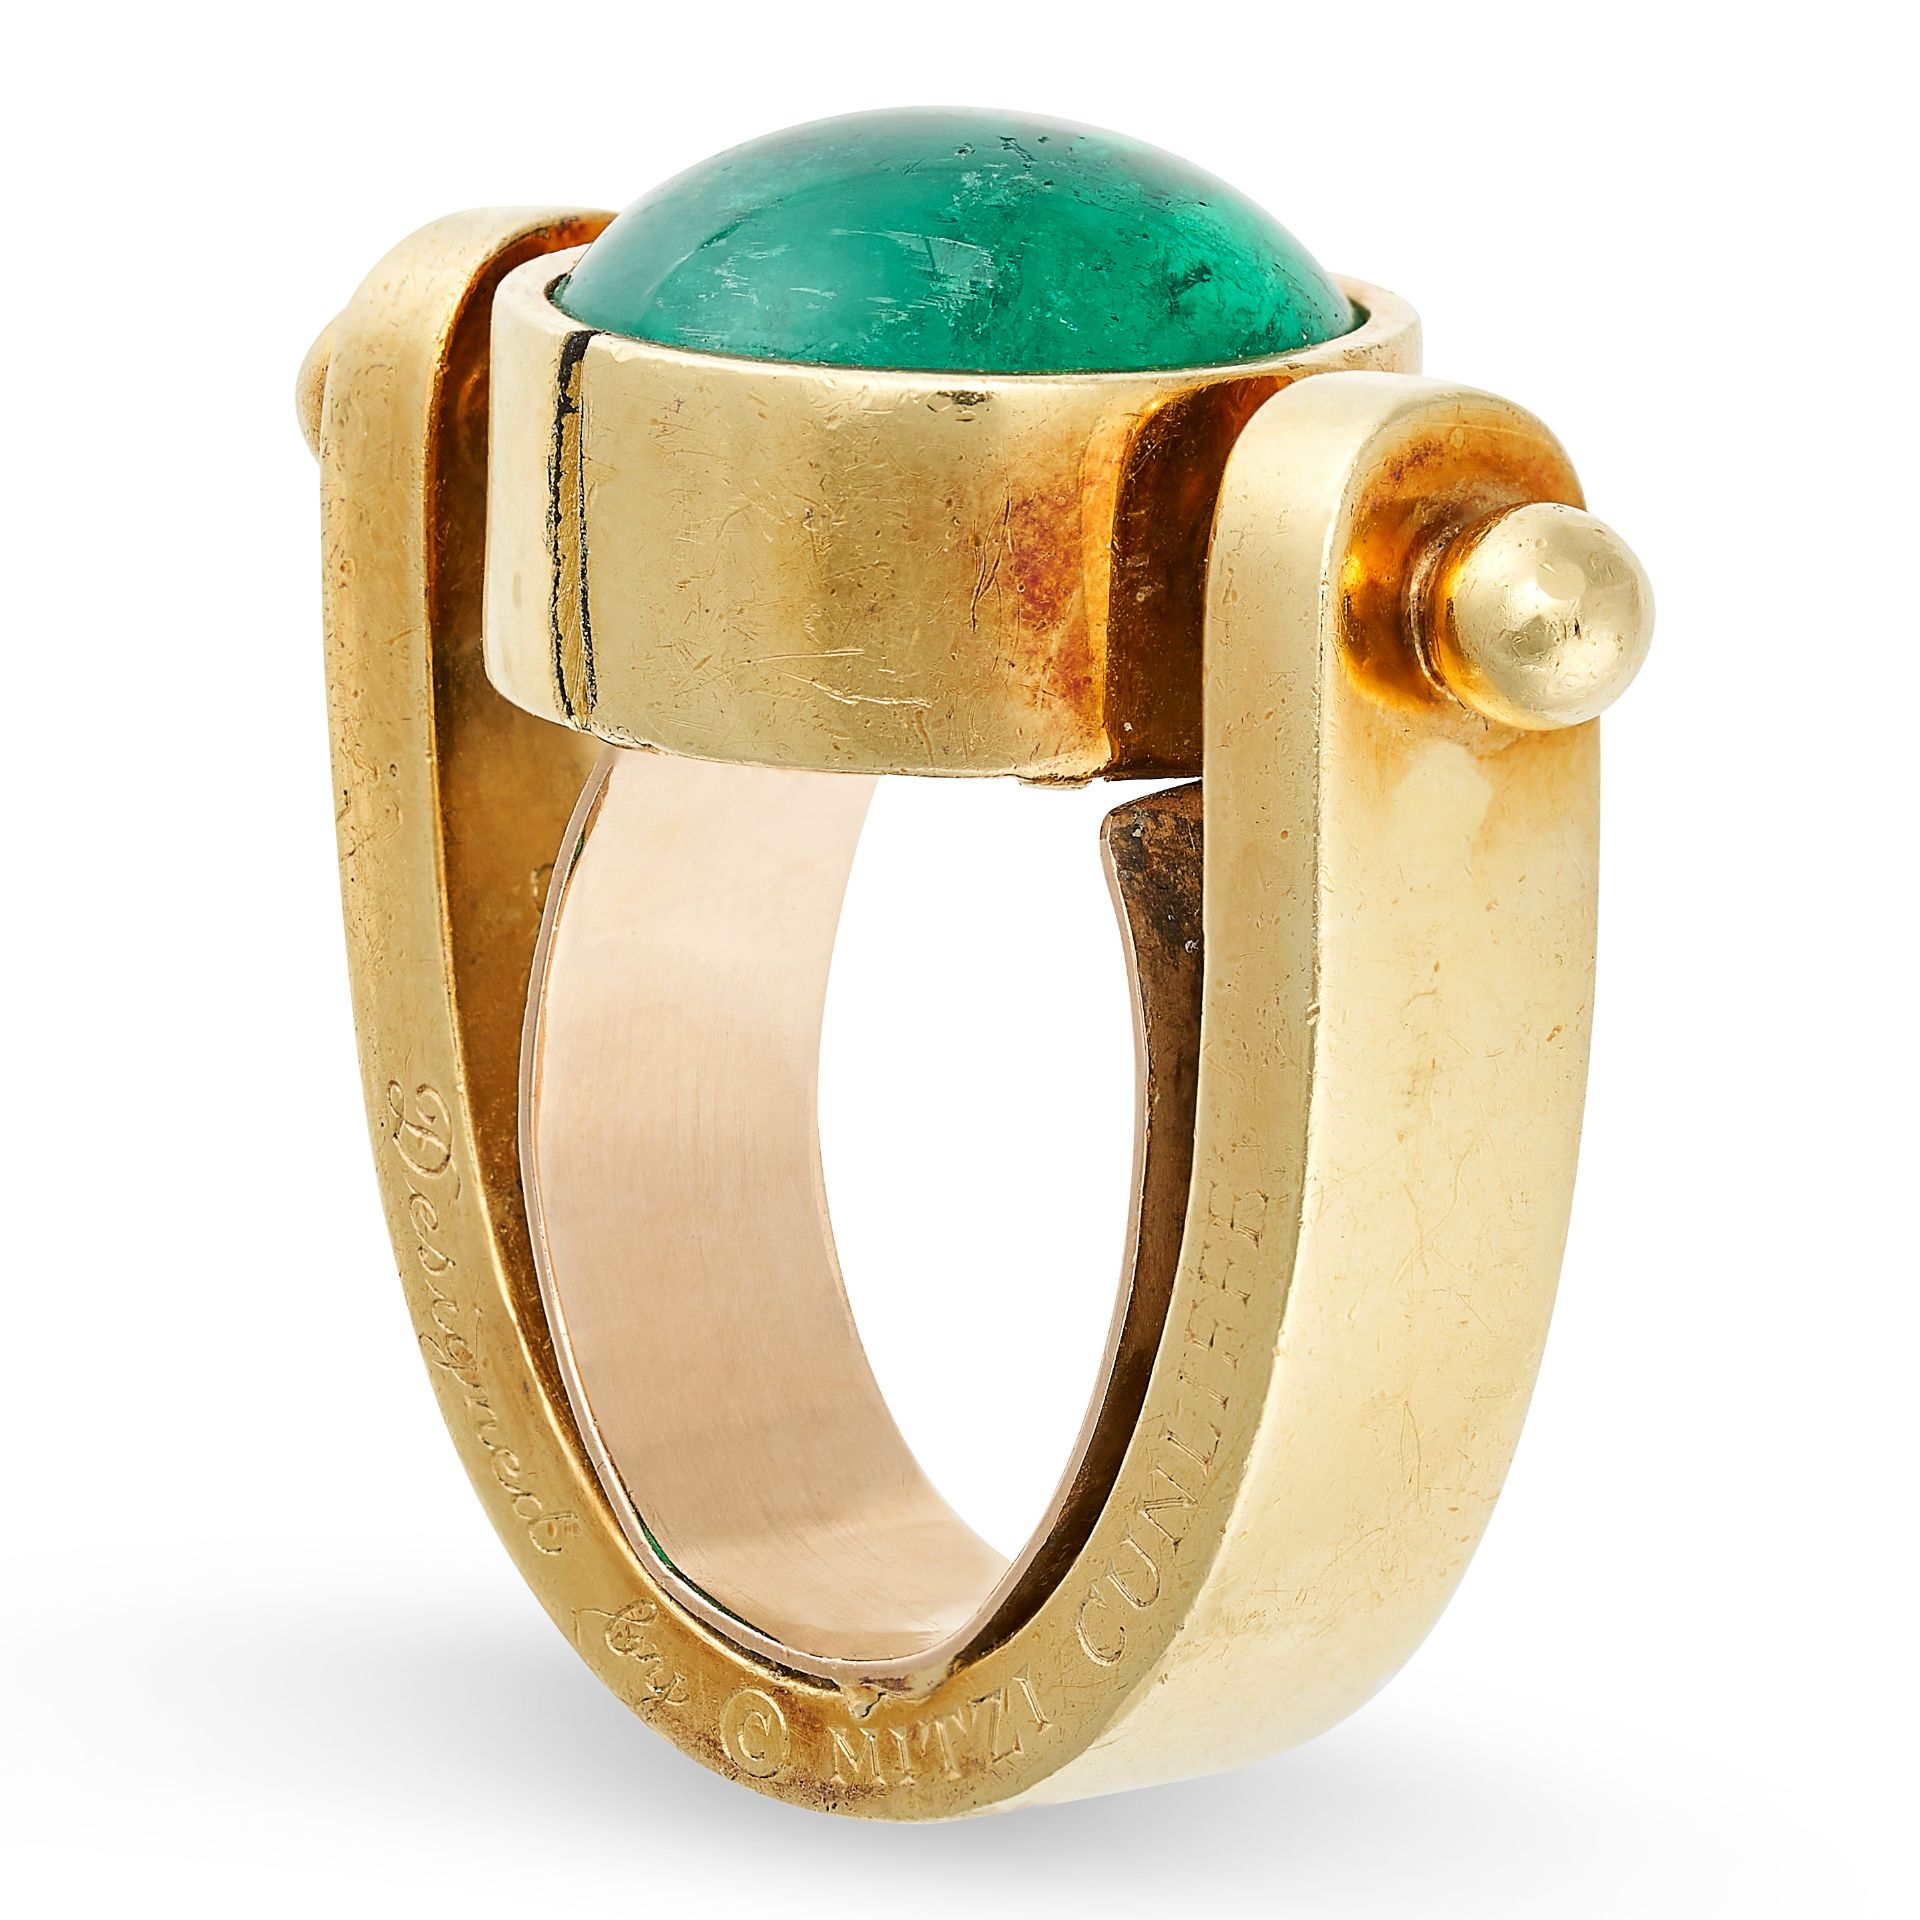 MITZI CUNLIFFE FOR CARTIER, A VINTAGE EMERALD DRESS RING in 18ct yellow gold, set with a cabochon - Image 2 of 2